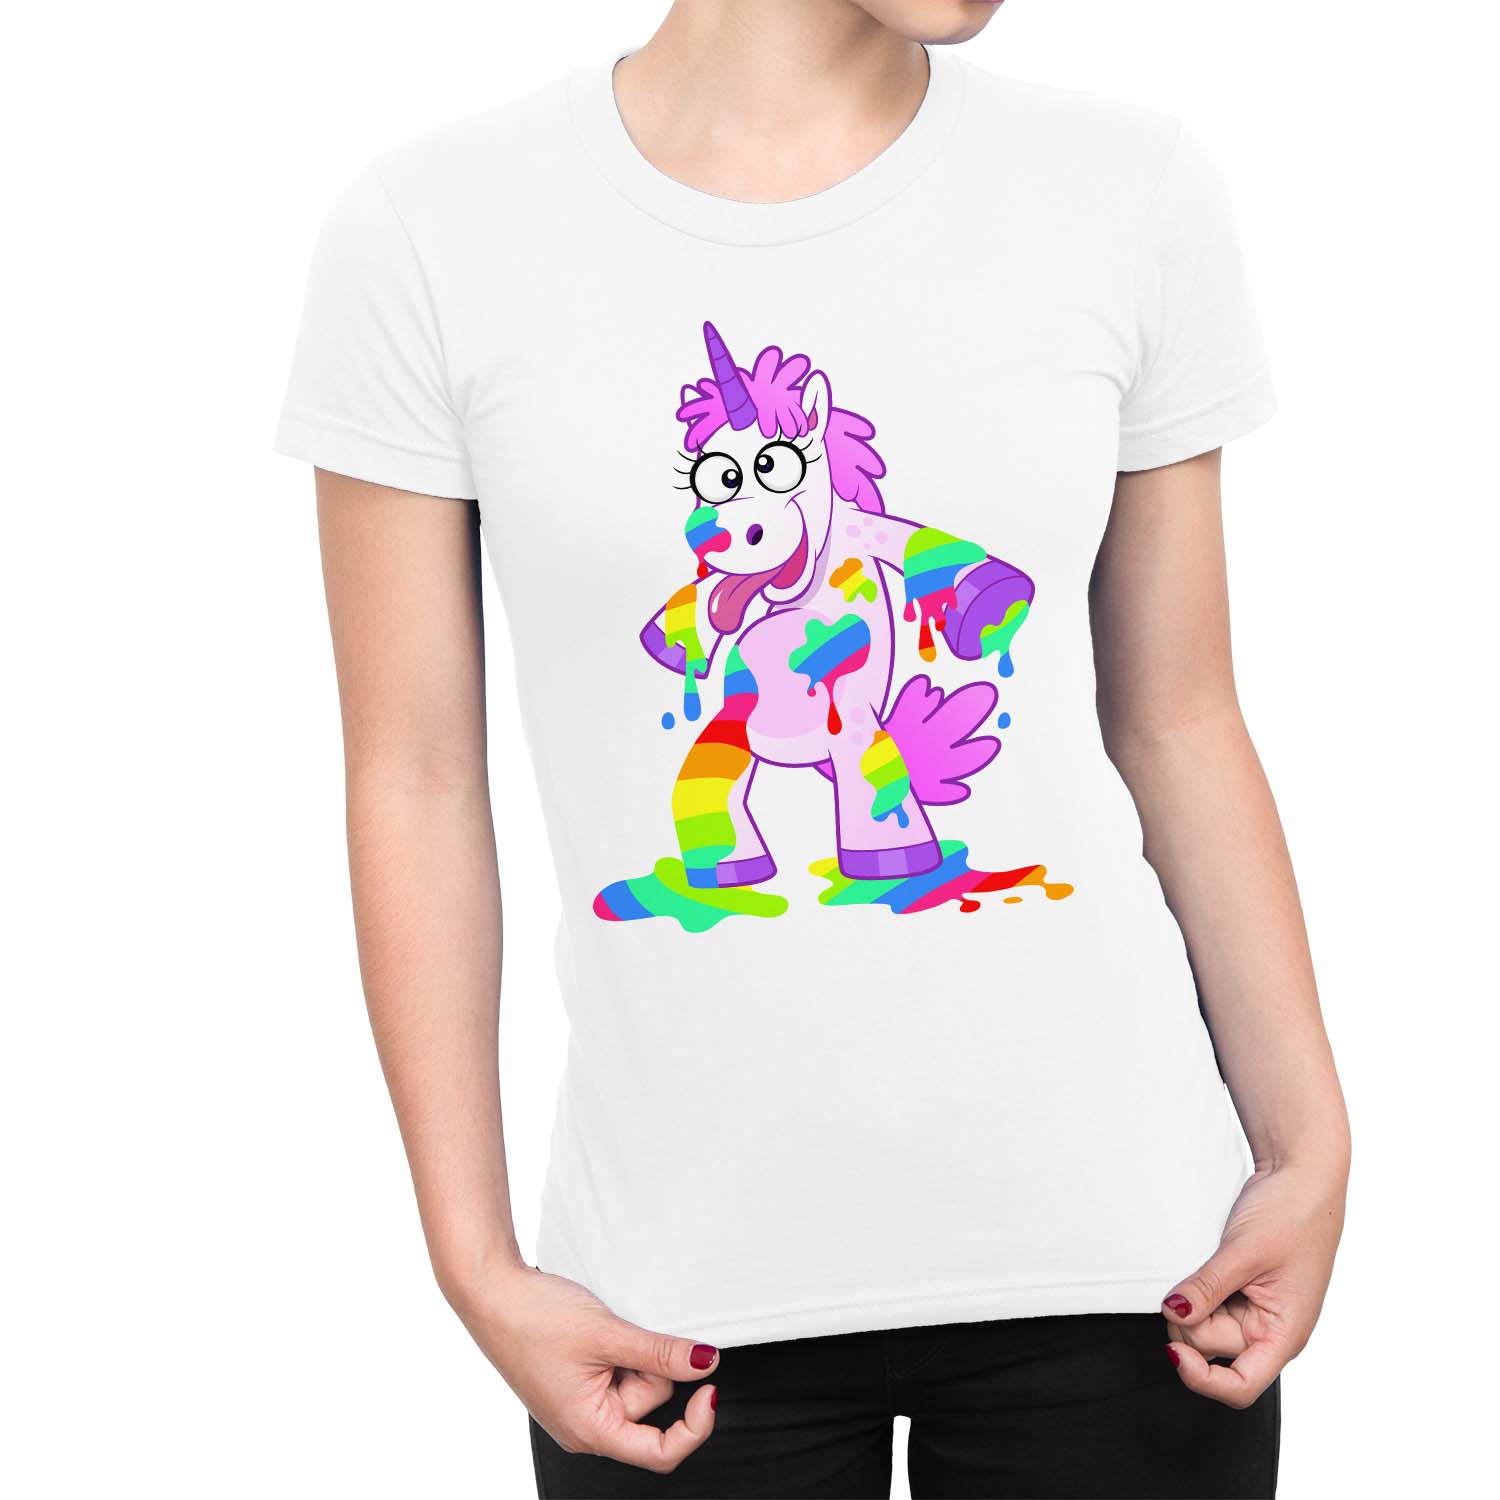 1Tee Womens Loose Fit Drunk Unicorn Covered in Rainbow Juice T-Shirt